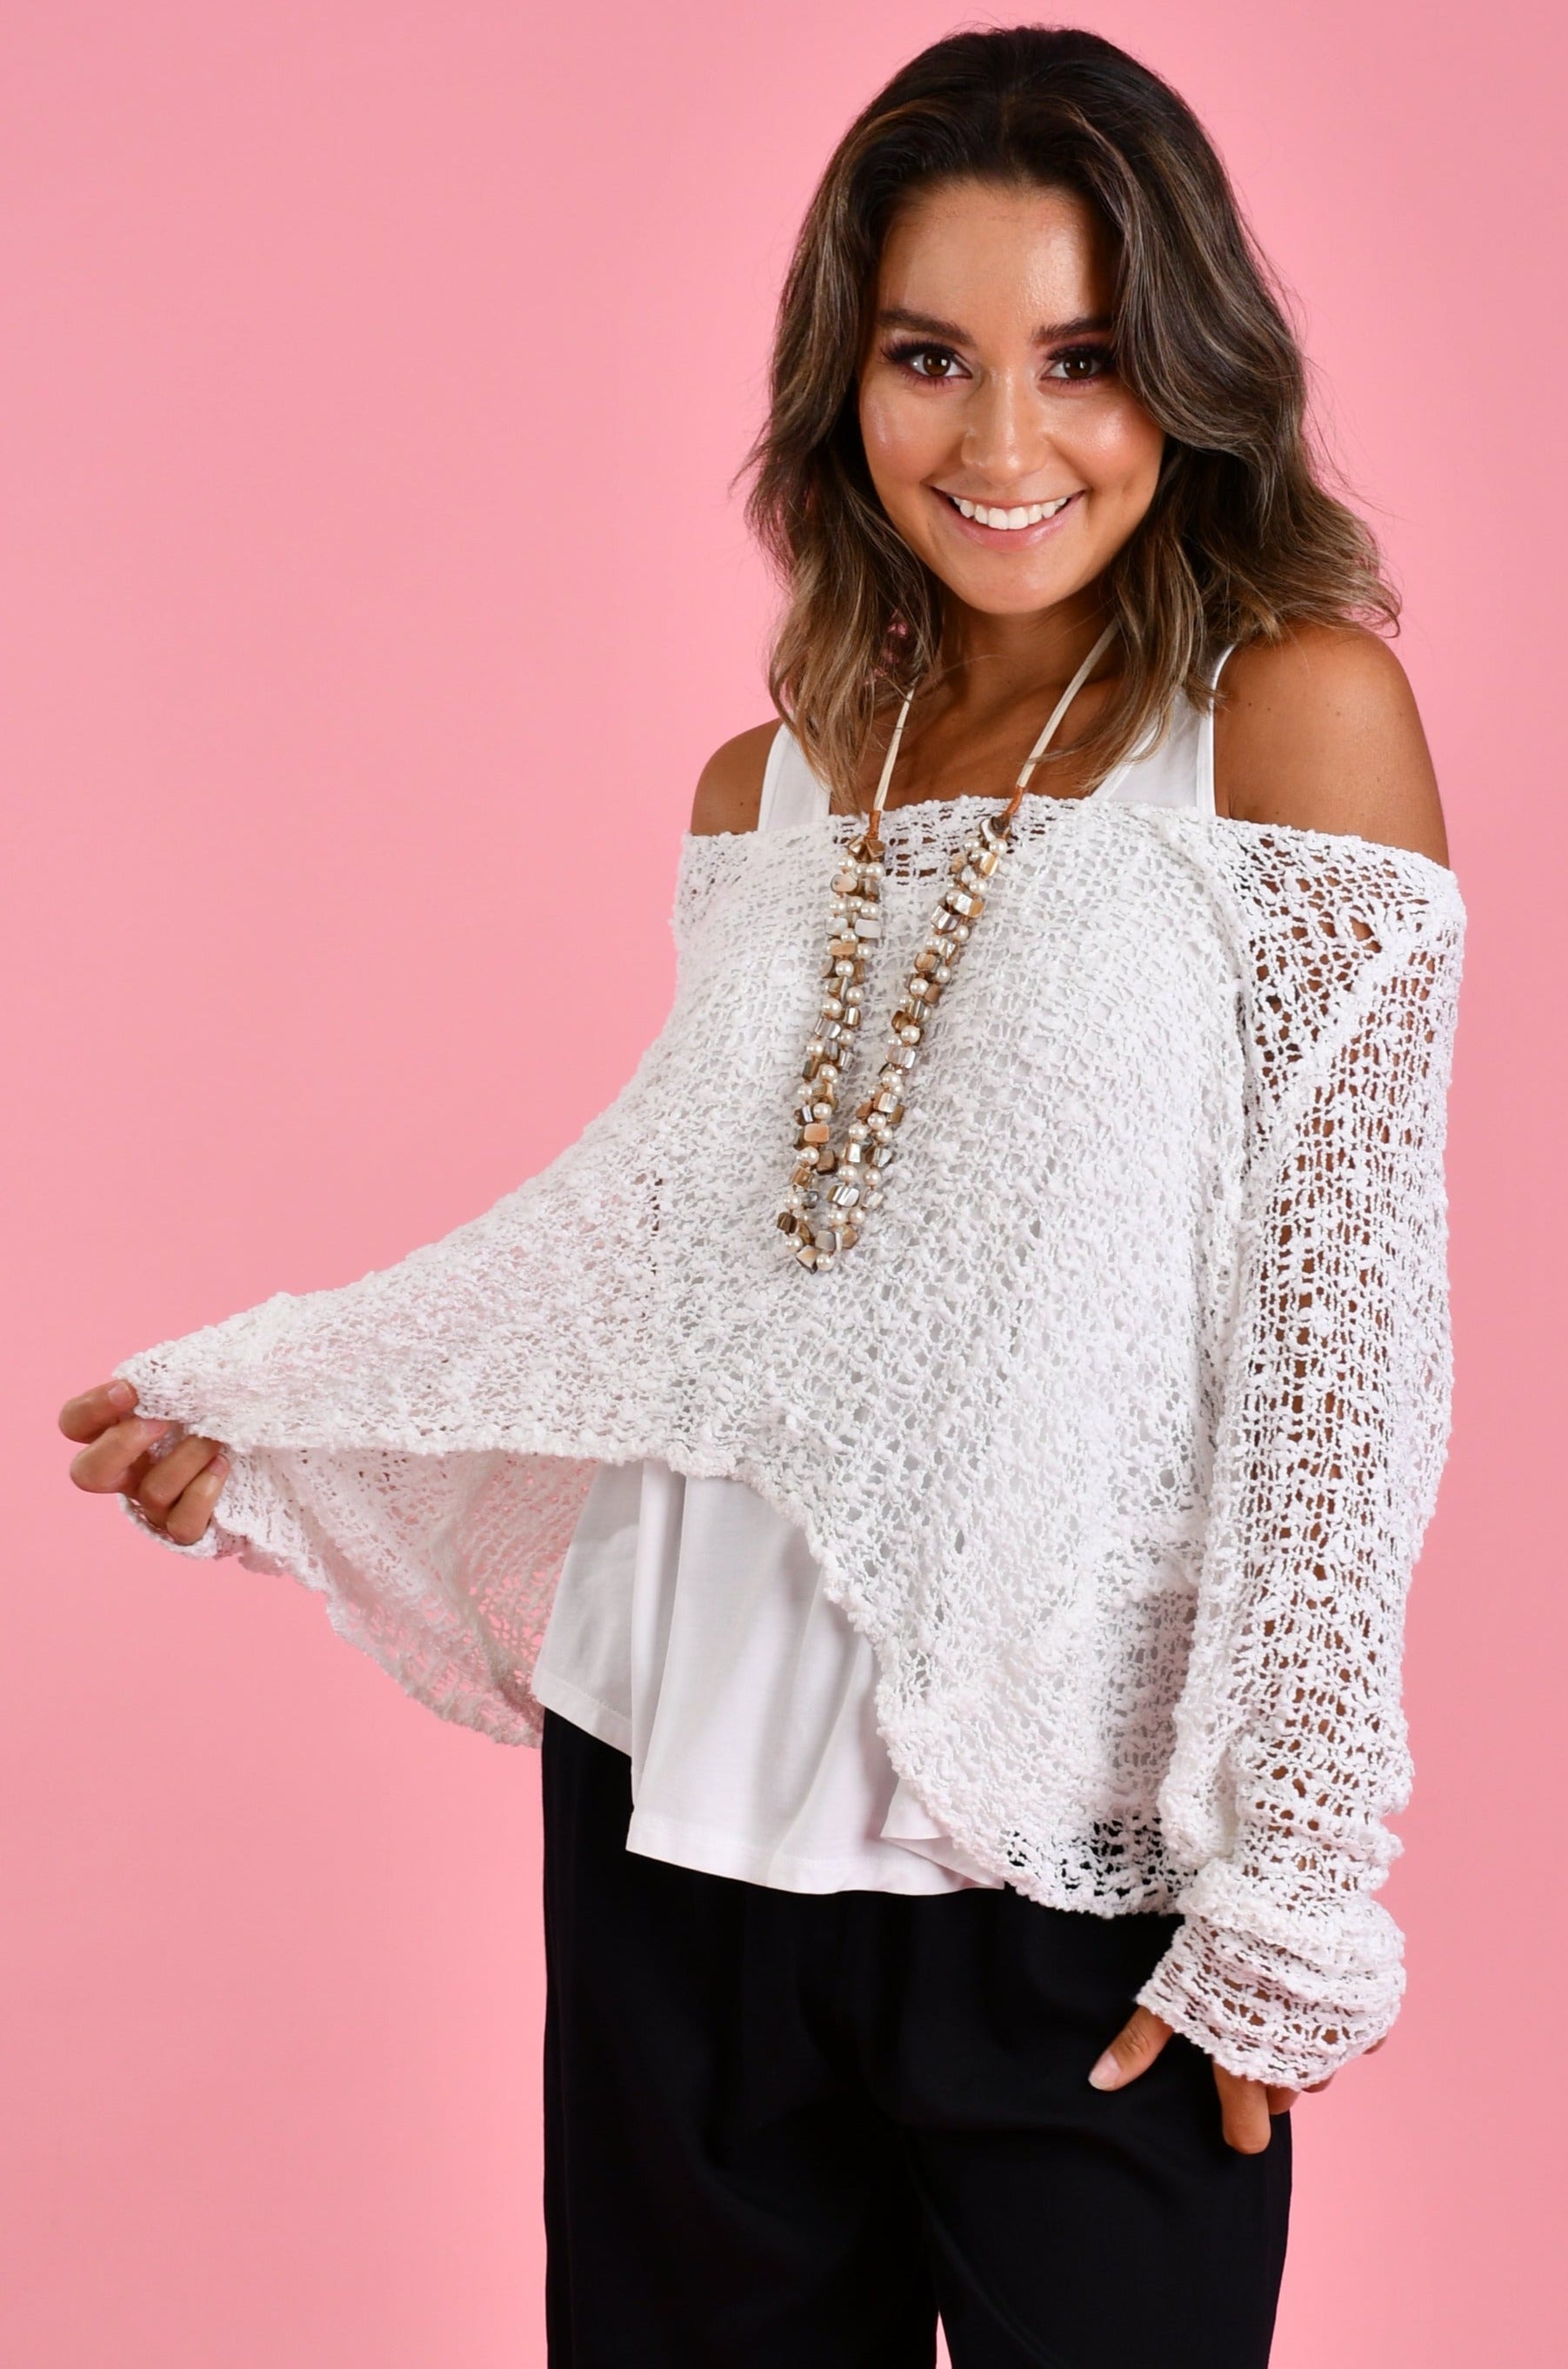 VBLJ060 - CHANELL KNITTED TOP - WHITE